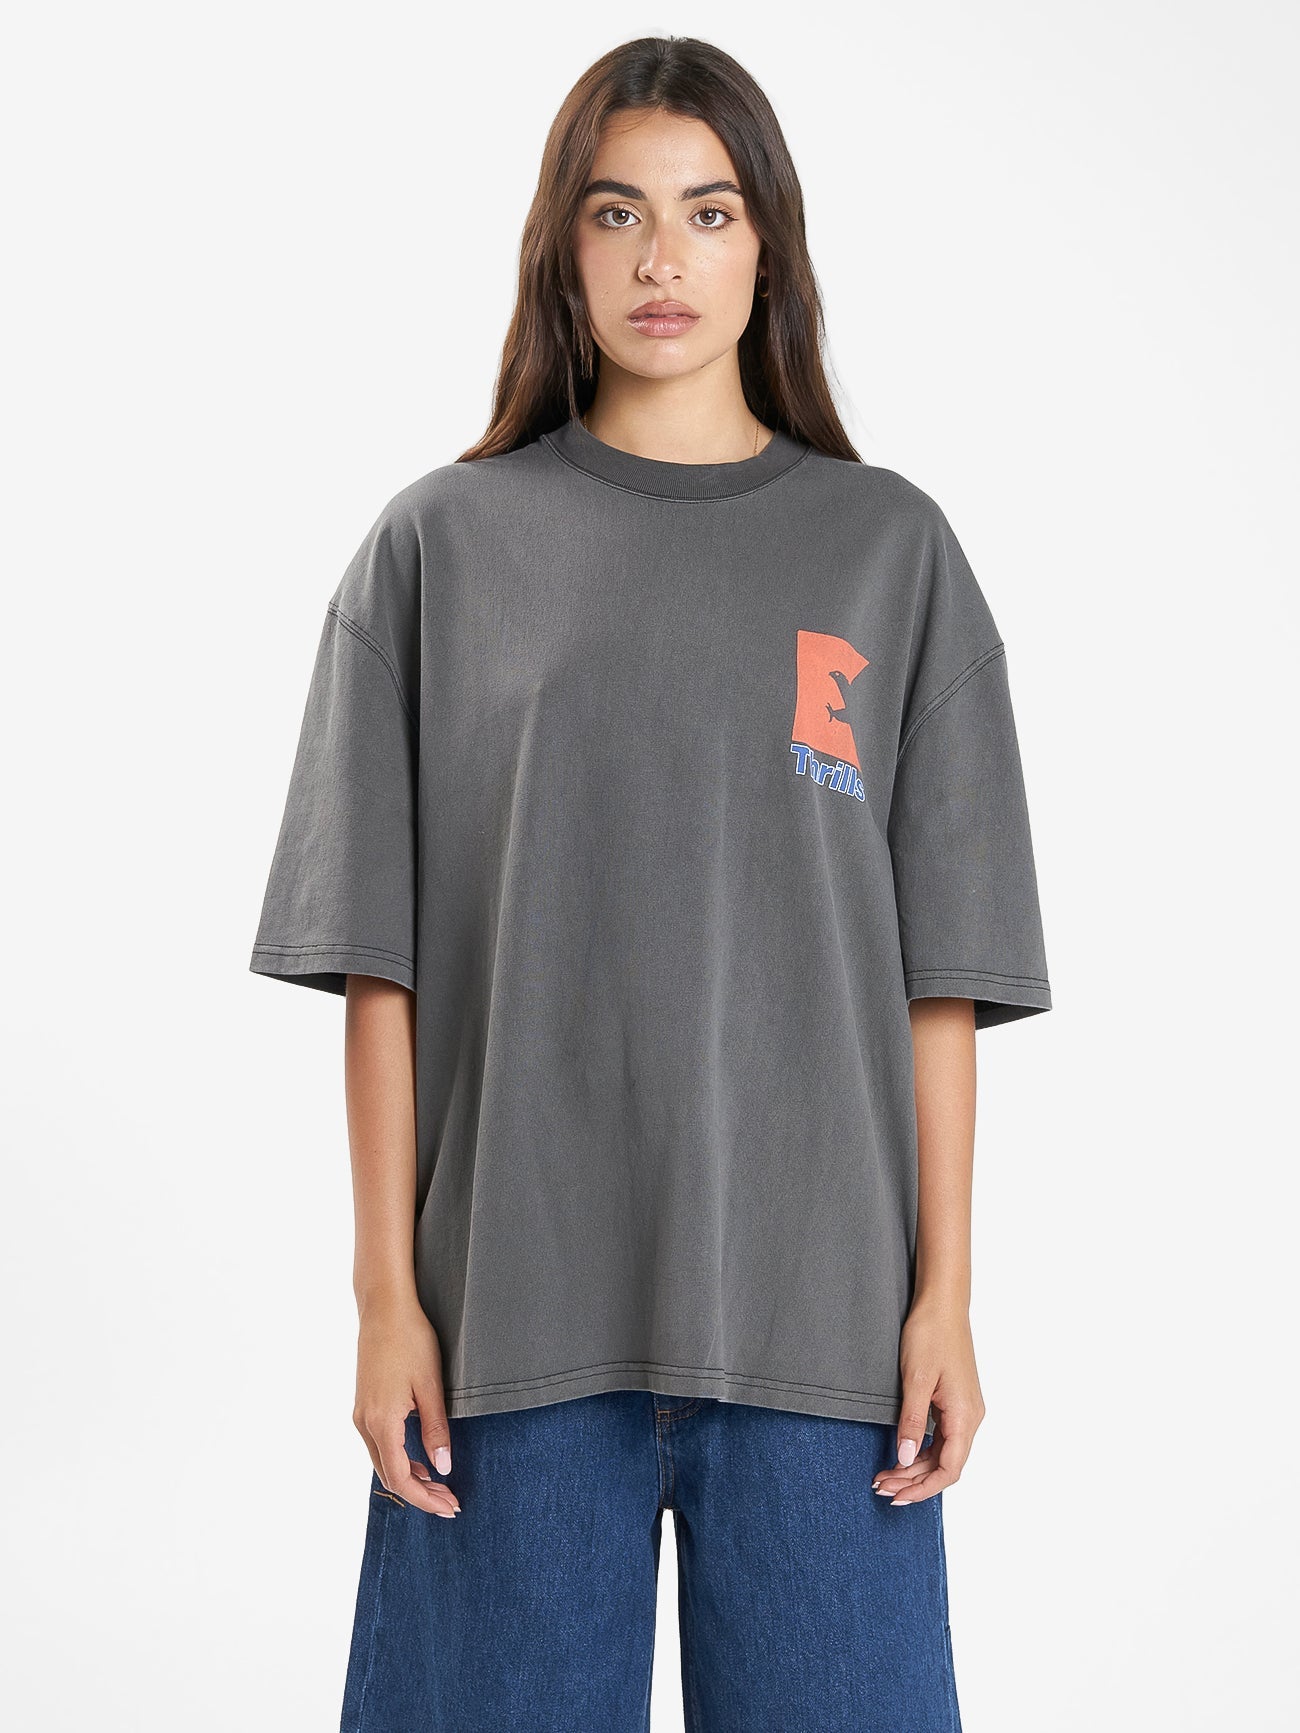 United Front Oversized Tee - Merch Black 4